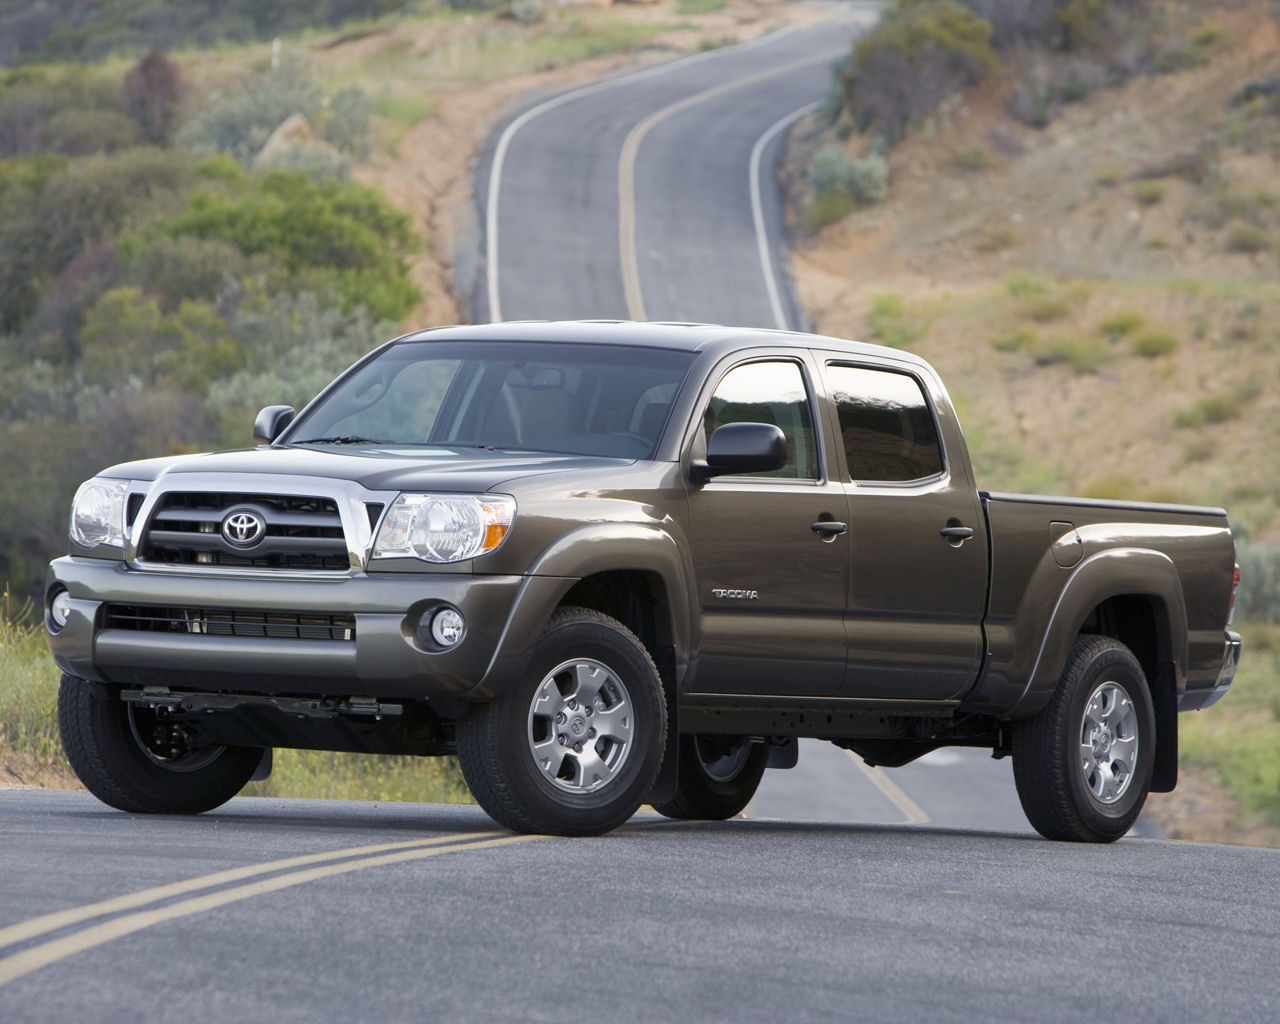 Toyota Tacoma Wallpaper 5525 Hd Wallpapers in Cars   Imagescicom 1280x1024